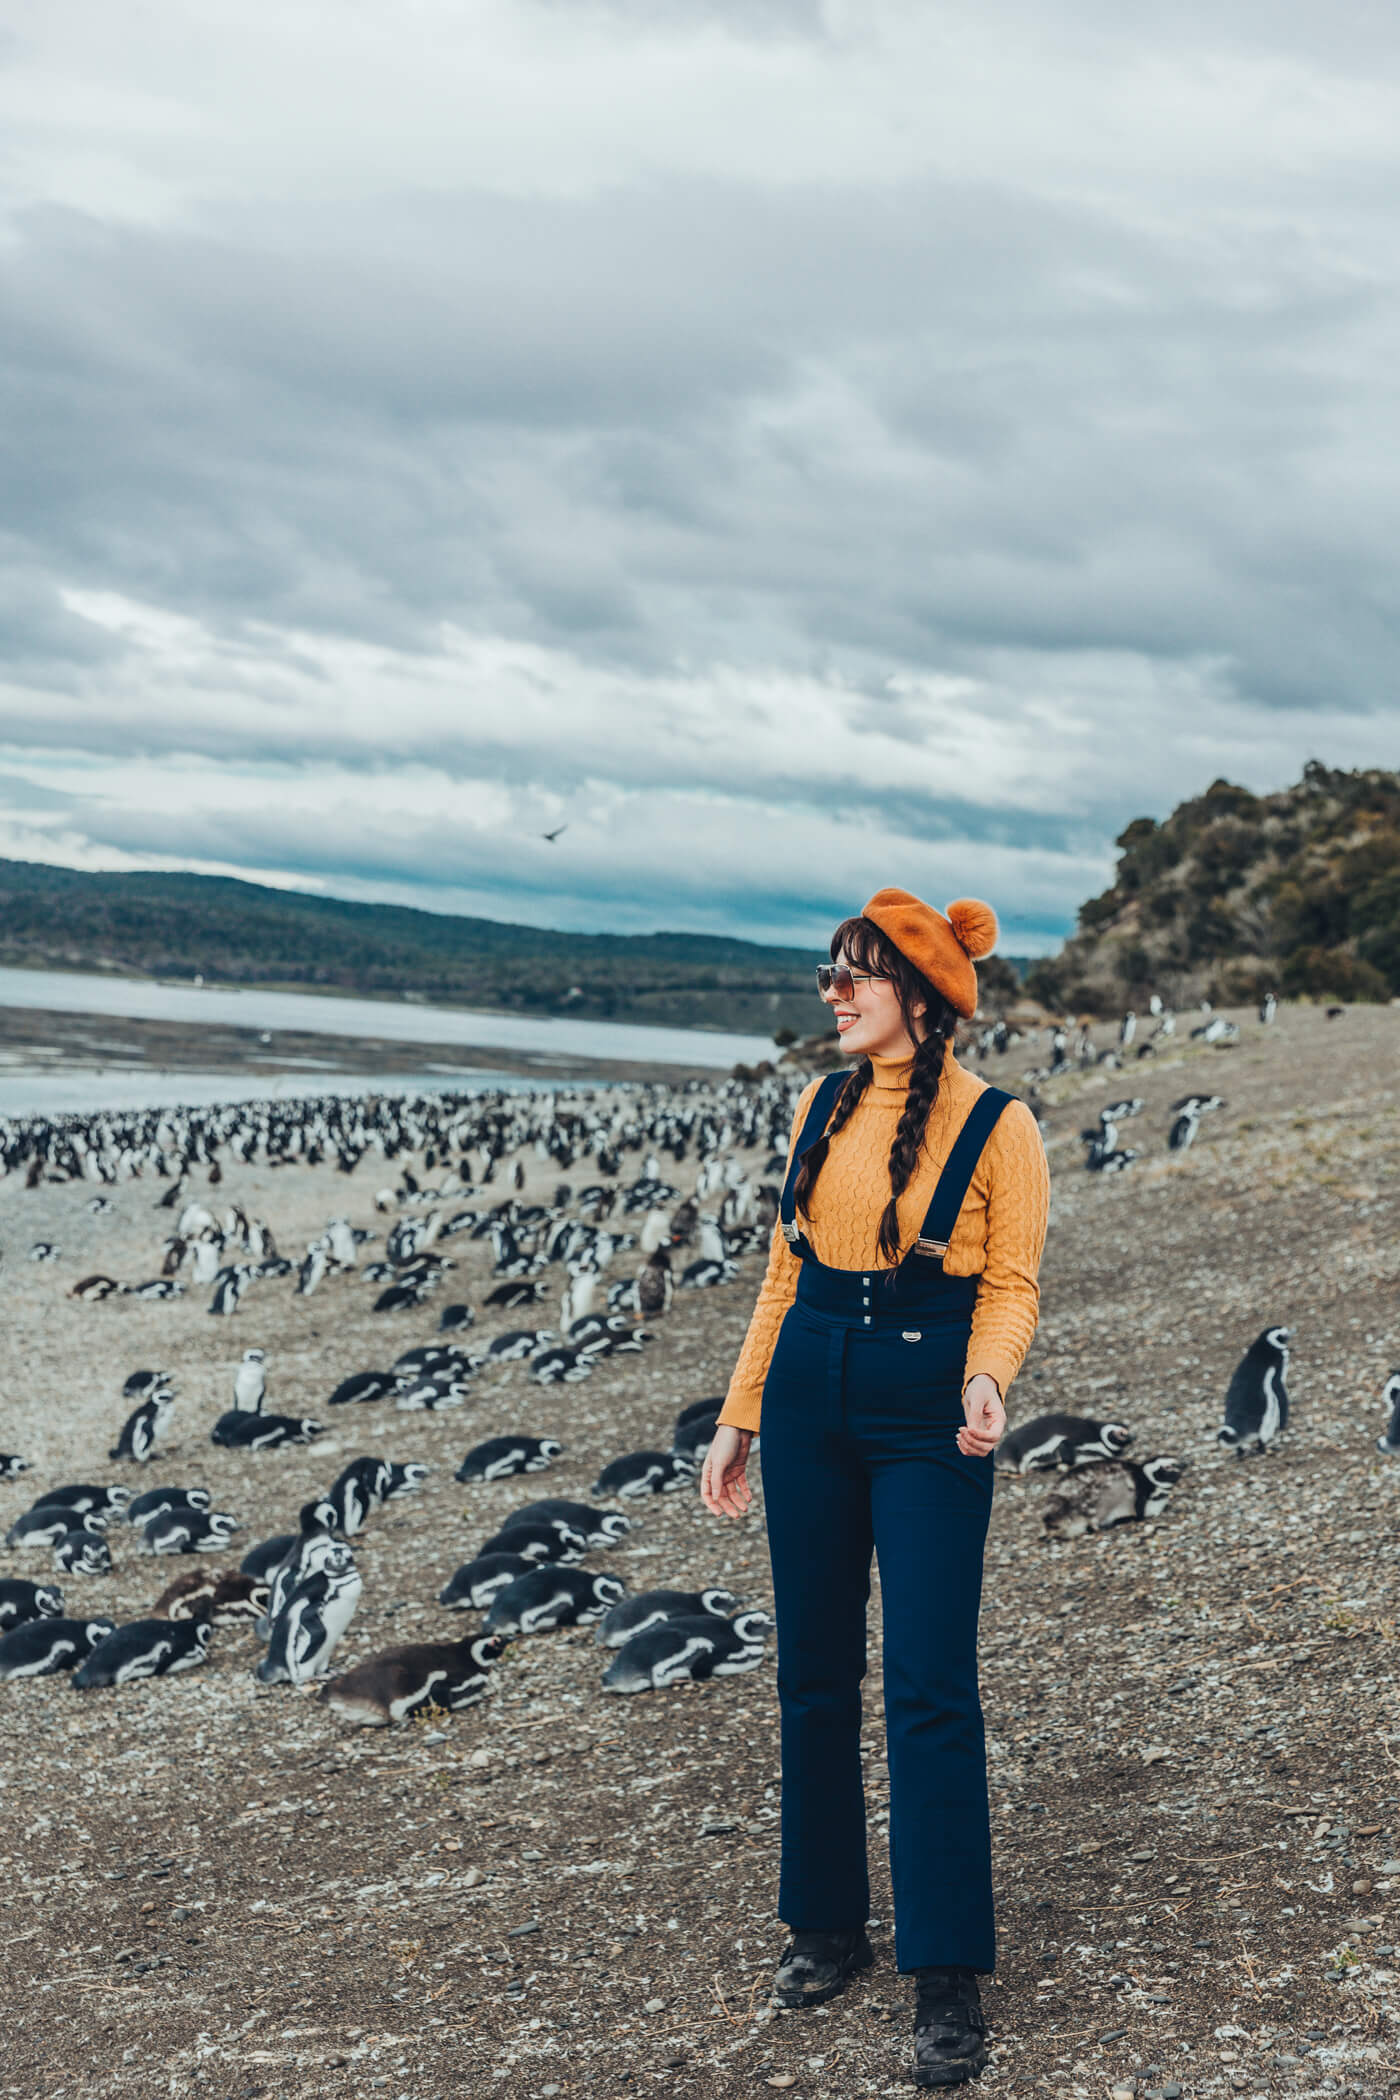 how to walk with the penguins in argentina on ushuaia piratour